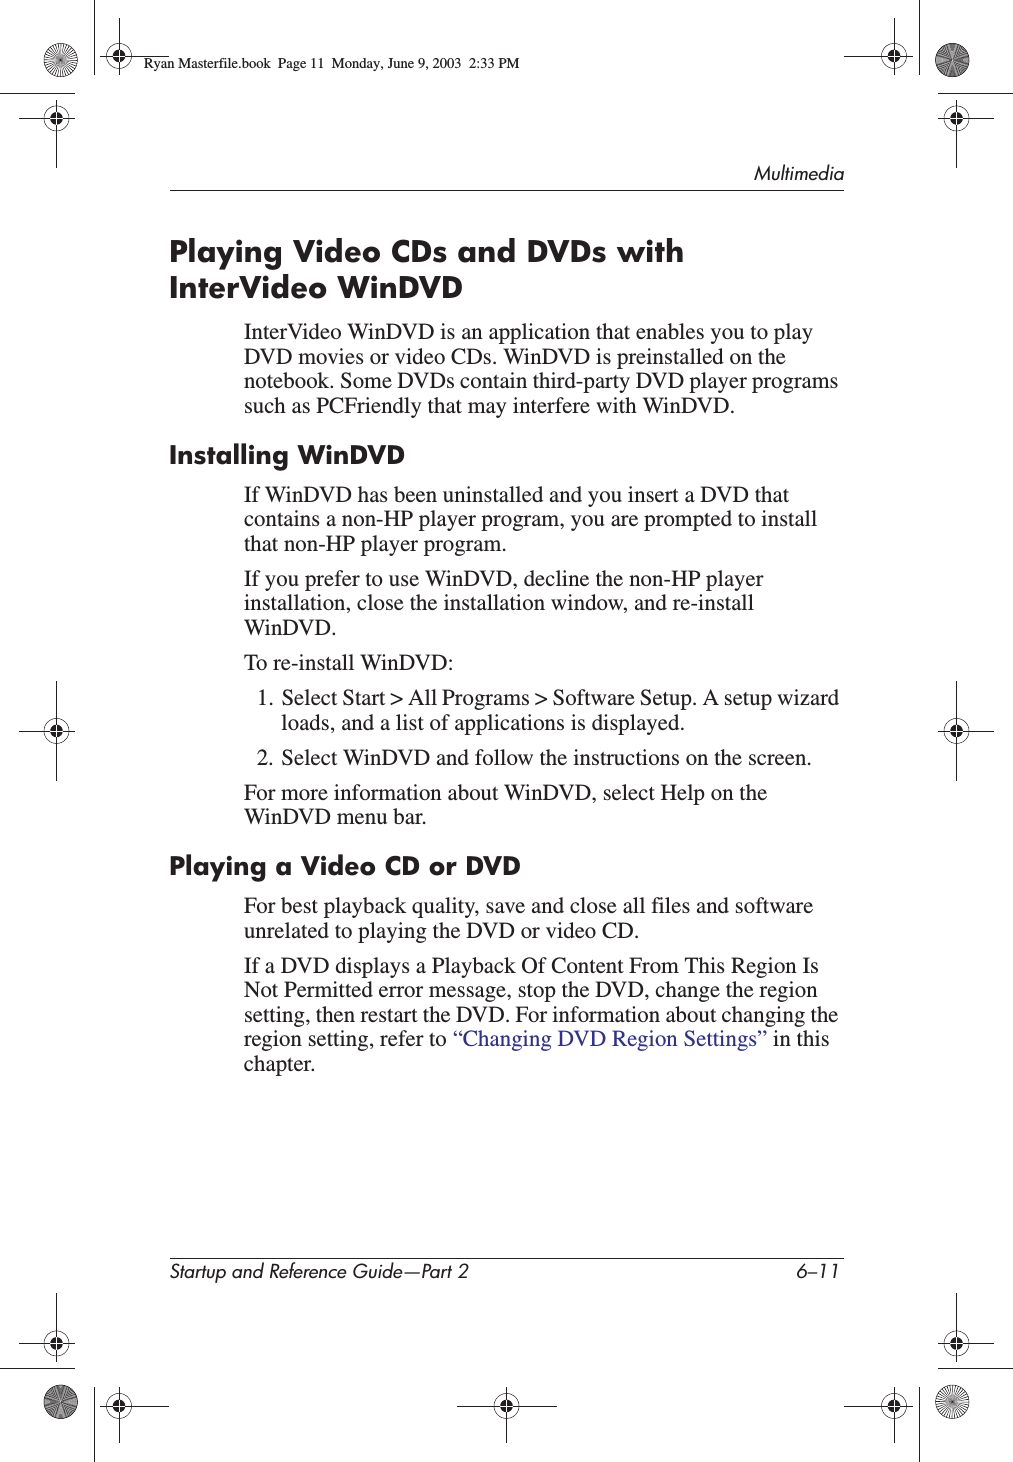 MultimediaStartup and Reference Guide—Part 2 6–11Playing Video CDs and DVDs with InterVideo WinDVDInterVideo WinDVD is an application that enables you to play DVD movies or video CDs. WinDVD is preinstalled on the notebook. Some DVDs contain third-party DVD player programs such as PCFriendly that may interfere with WinDVD.Installing WinDVDIf WinDVD has been uninstalled and you insert a DVD that contains a non-HP player program, you are prompted to install that non-HP player program.If you prefer to use WinDVD, decline the non-HP player installation, close the installation window, and re-install WinDVD.To re-install WinDVD:1. Select Start &gt; All Programs &gt; Software Setup. A setup wizard loads, and a list of applications is displayed.2. Select WinDVD and follow the instructions on the screen.For more information about WinDVD, select Help on the WinDVD menu bar.Playing a Video CD or DVDFor best playback quality, save and close all files and software unrelated to playing the DVD or video CD.If a DVD displays a Playback Of Content From This Region Is Not Permitted error message, stop the DVD, change the region setting, then restart the DVD. For information about changing the region setting, refer to “Changing DVD Region Settings” in this chapter.Ryan Masterfile.book  Page 11  Monday, June 9, 2003  2:33 PM